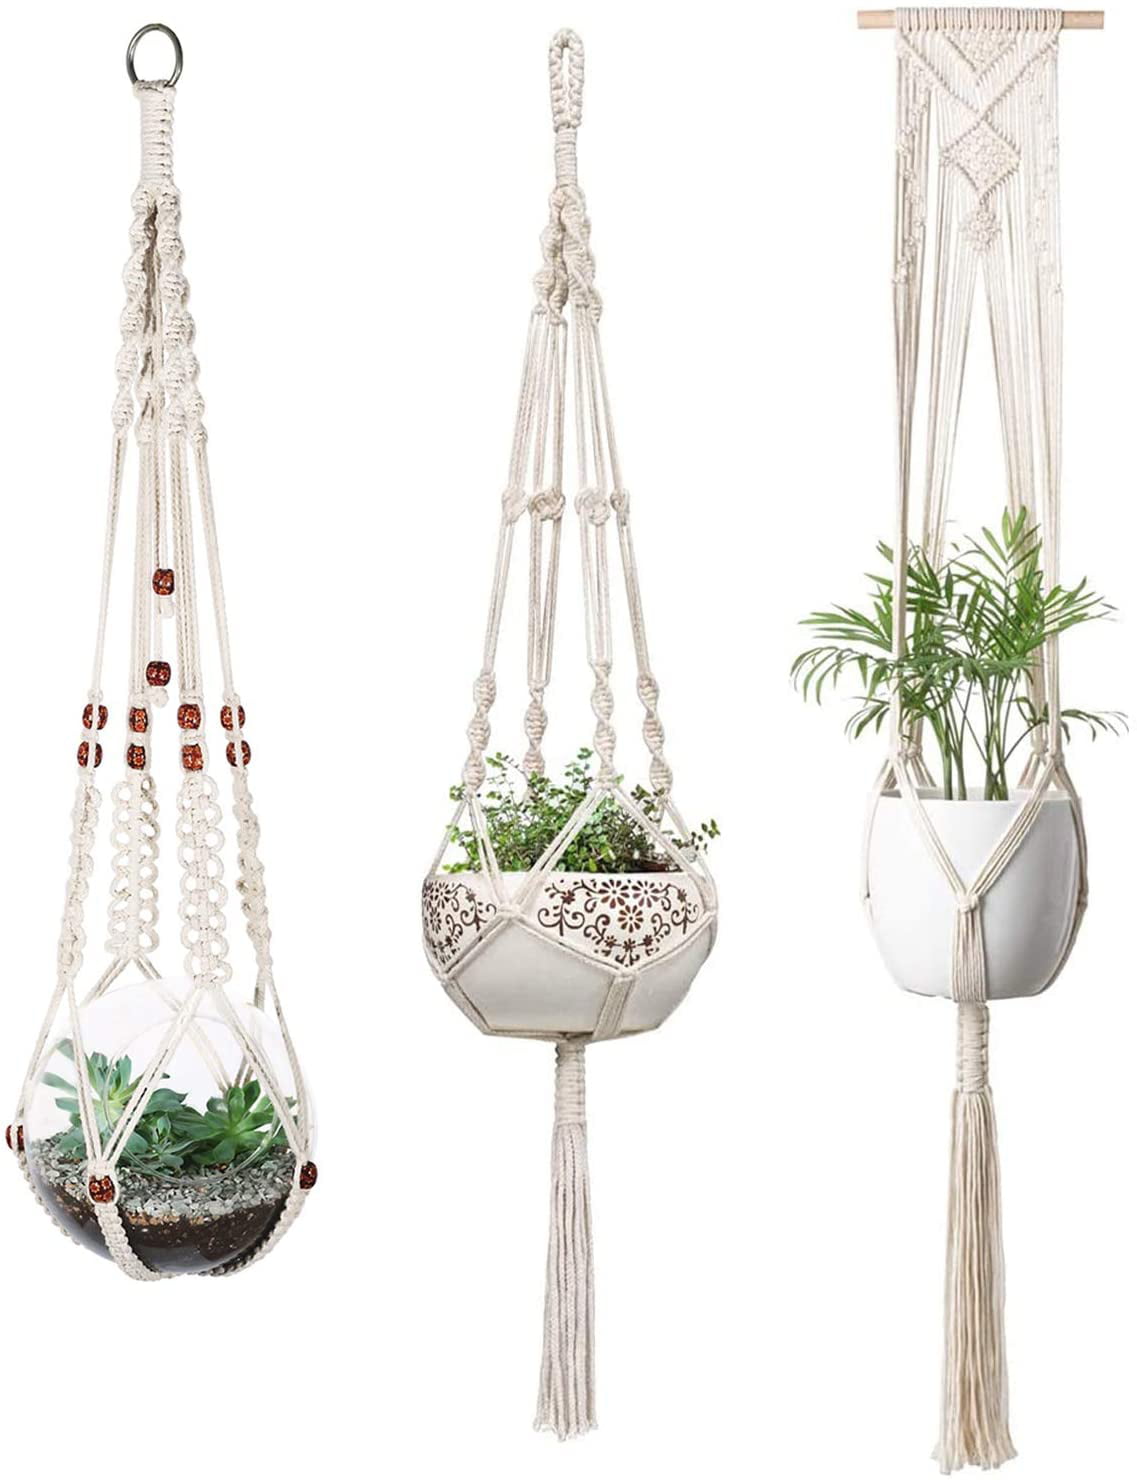 Flower Plant Hangers String Home Decoration Accessories 6pcs Small Large